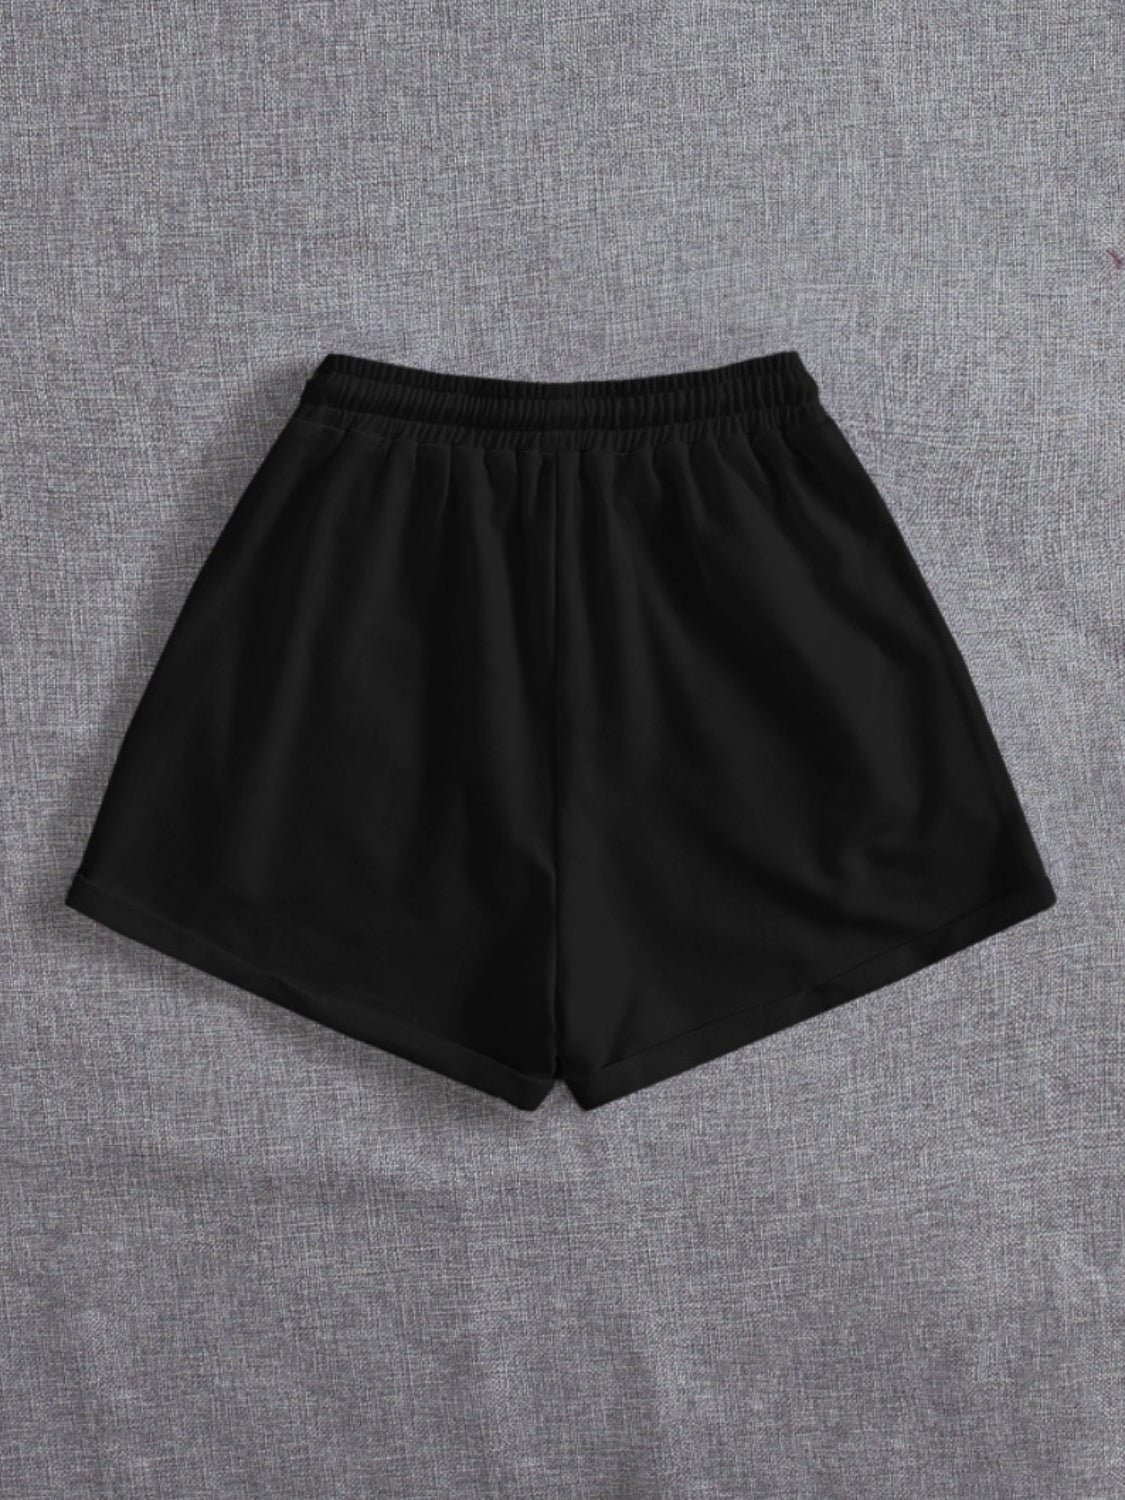 Slate Gray Drawstring Pocketed Elastic Waist Shorts Sentient Beauty Fashions Apparel & Accessories